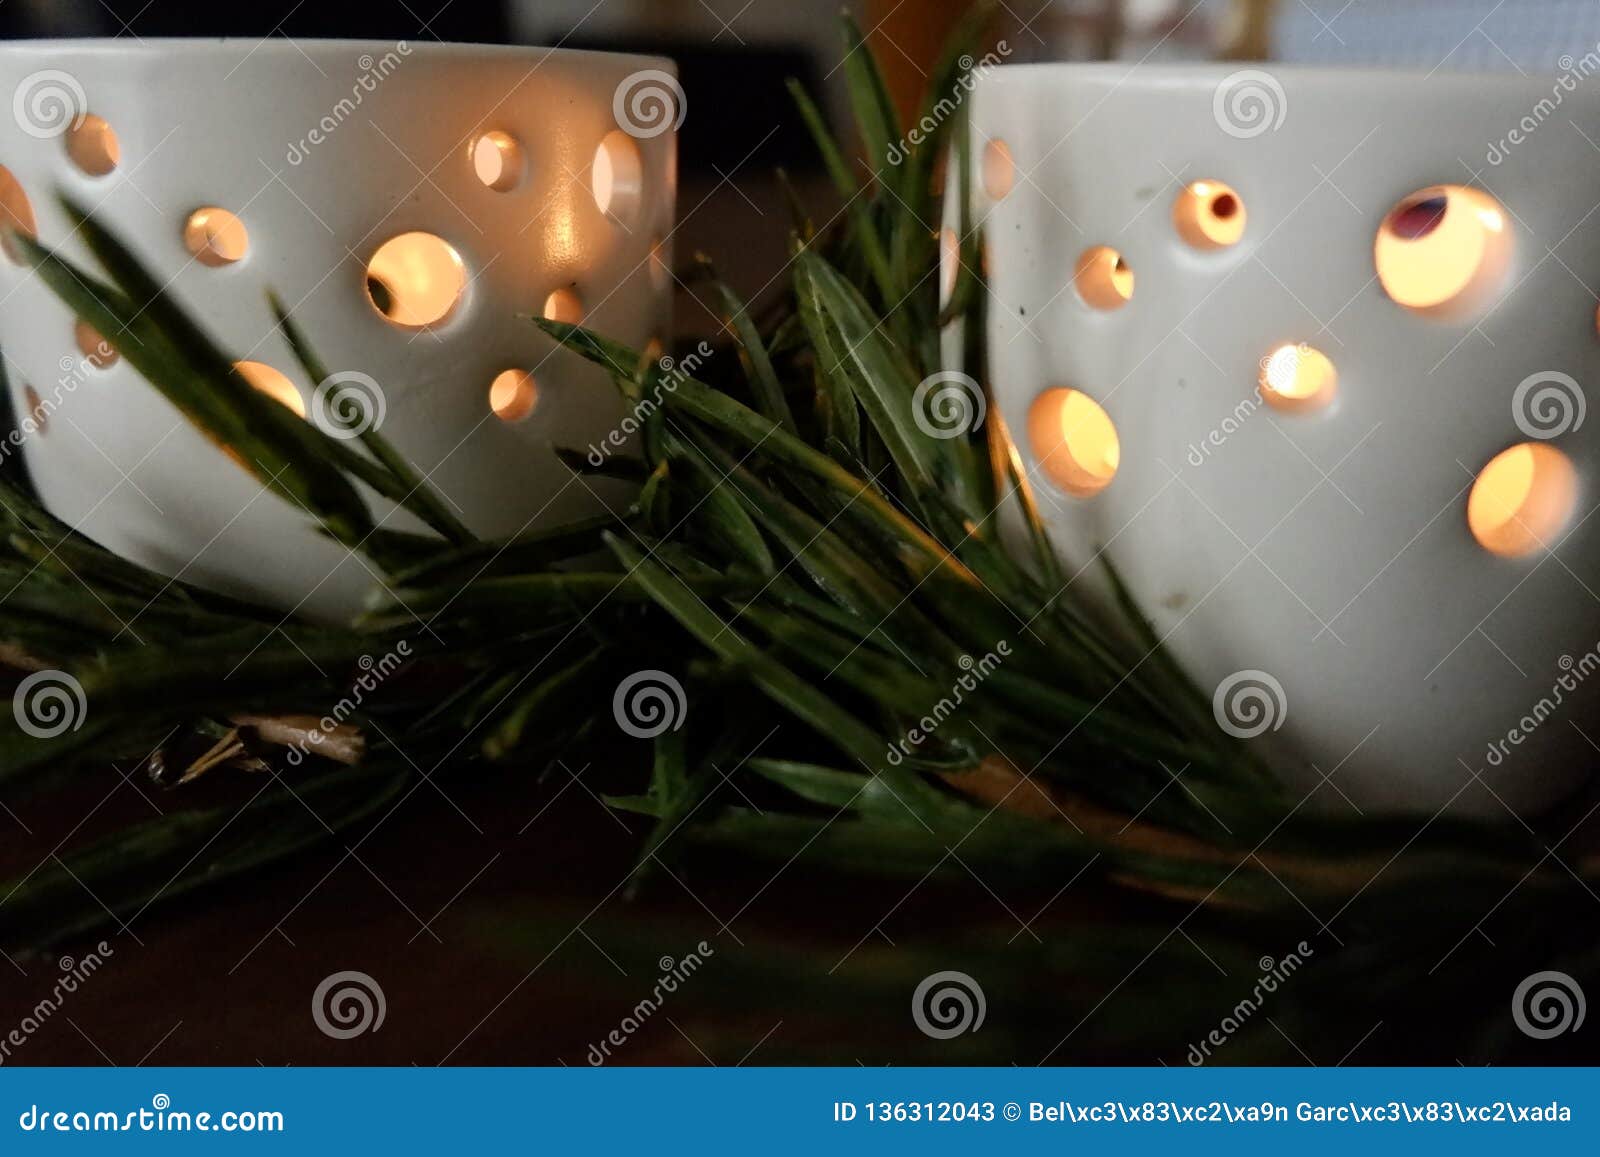 Candles for a Warm Illumination Stock Image - Image of romantic ...